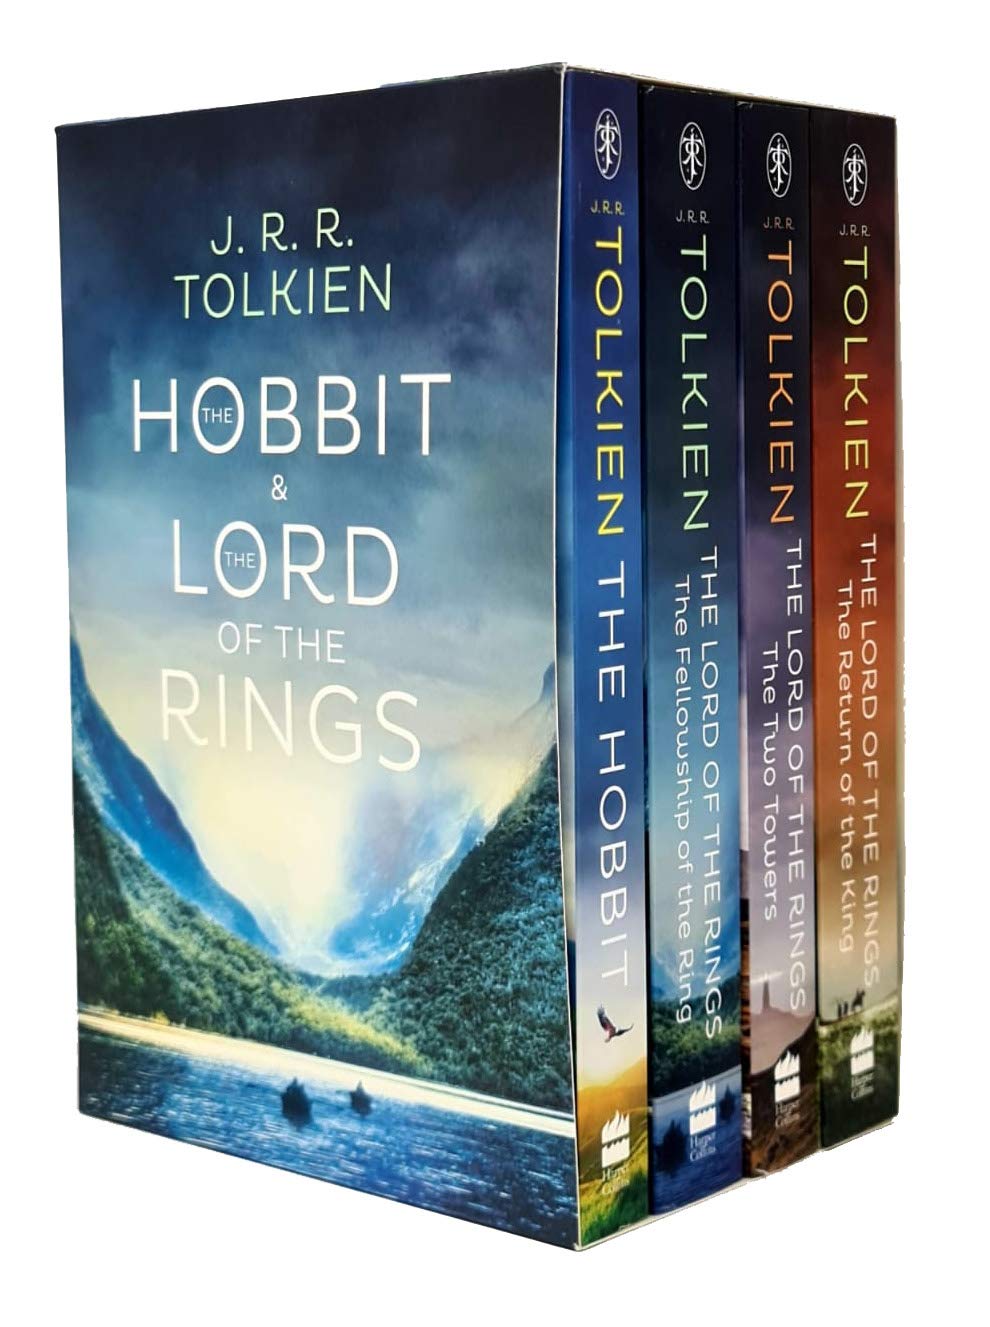 Lord of the Rings series